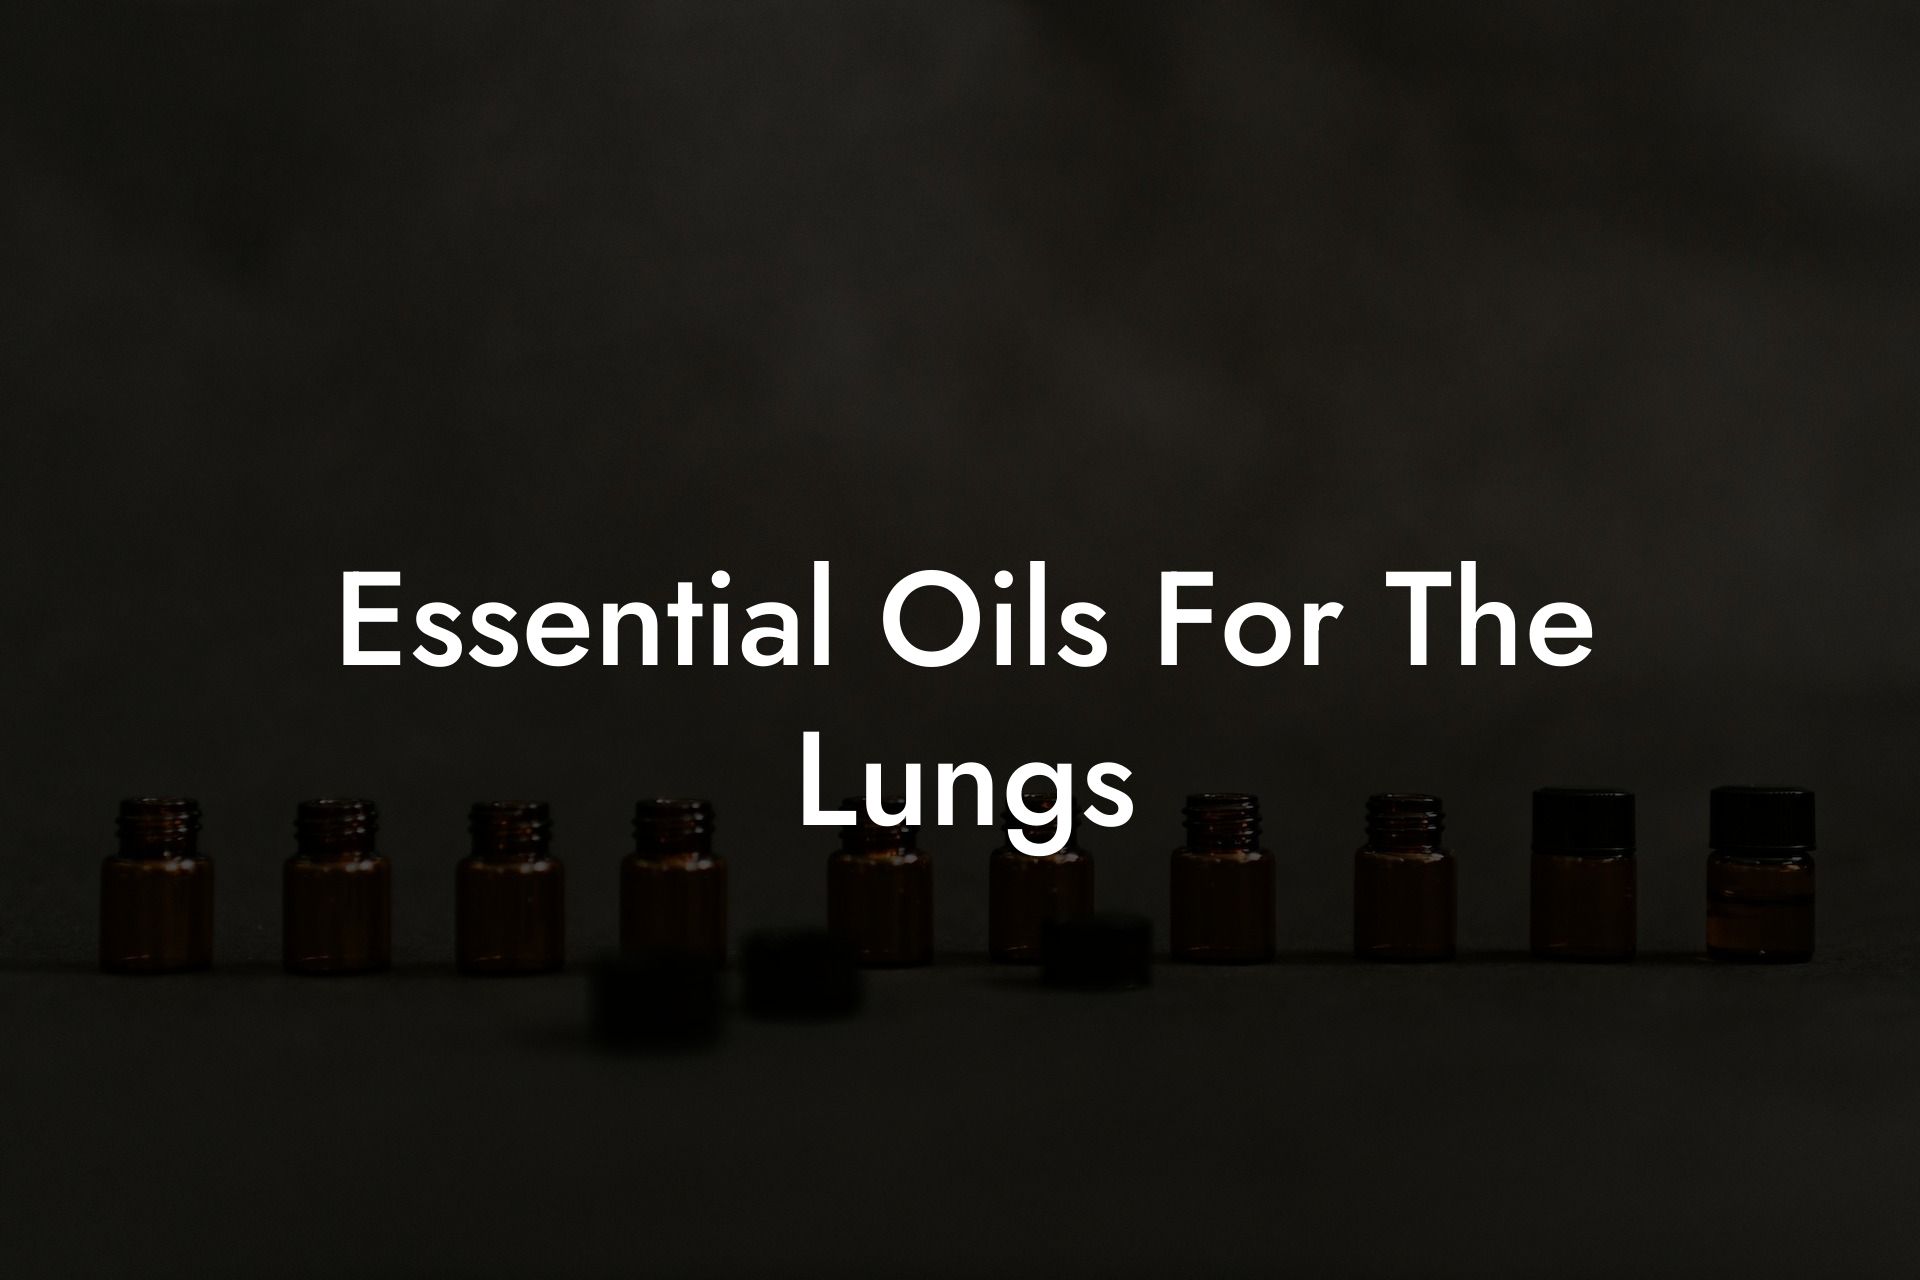 Essential Oils For The Lungs